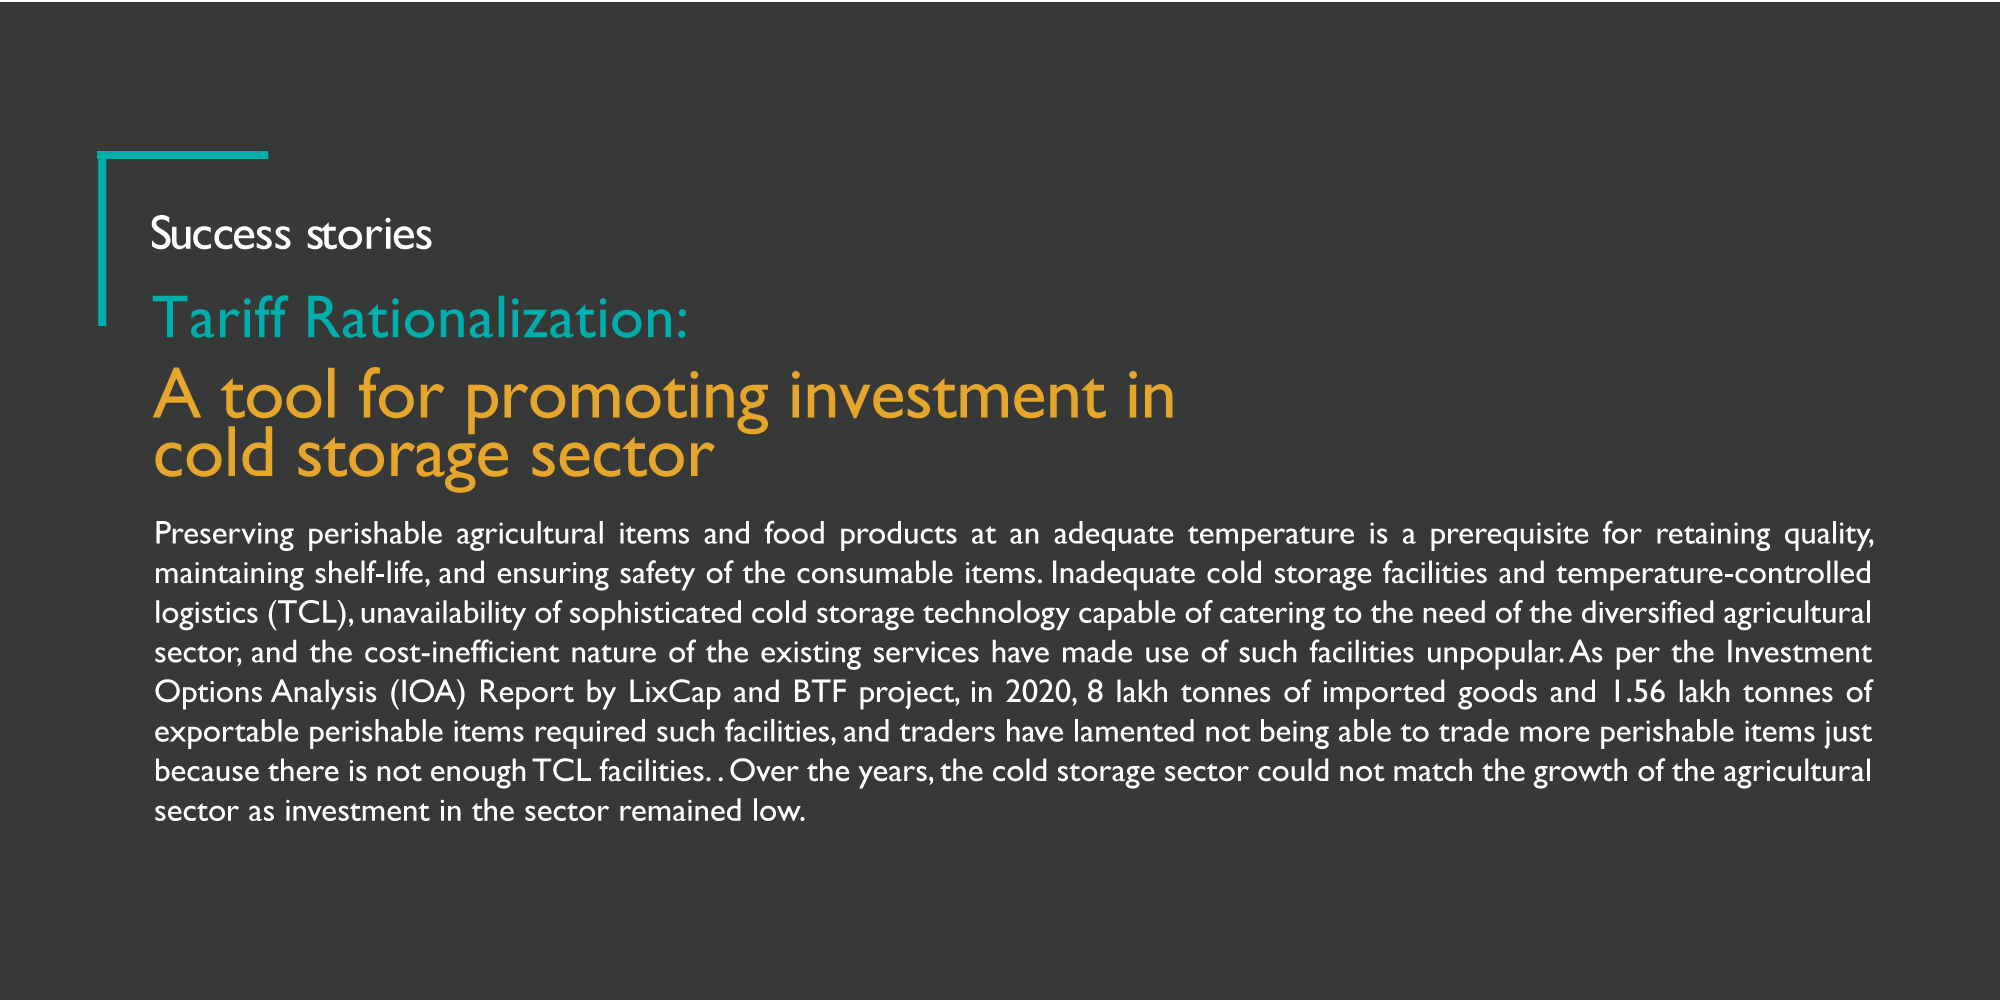 Tariff Rationalization: A tool for promoting investment in cold storage sector